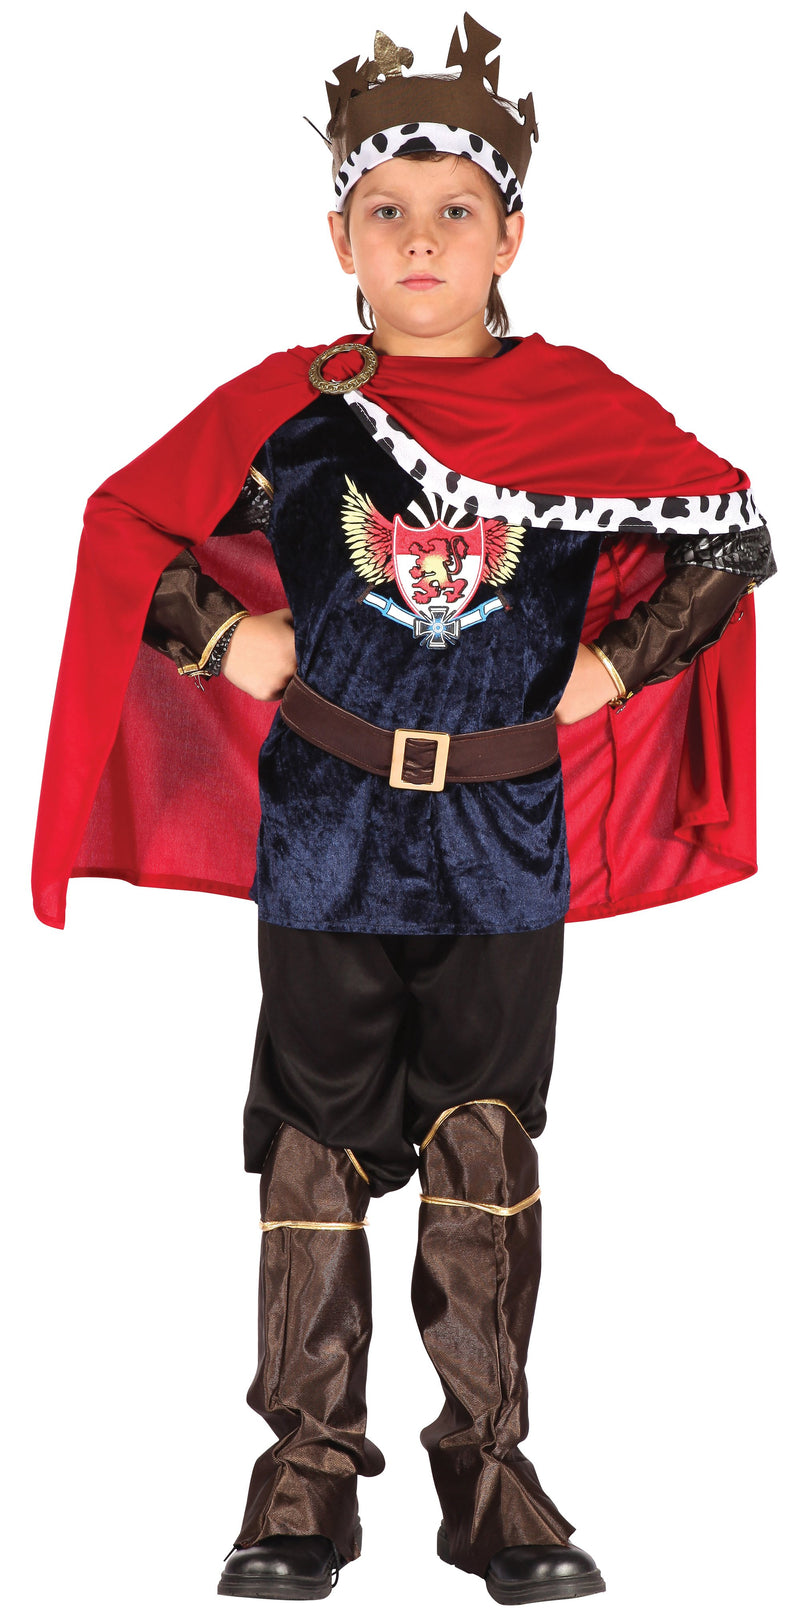 Fantasy King S Childrens Costumes Male To Fit Child Of Height 110cm 122cm Boys Bristol Novelty Childrens Costumes 2183